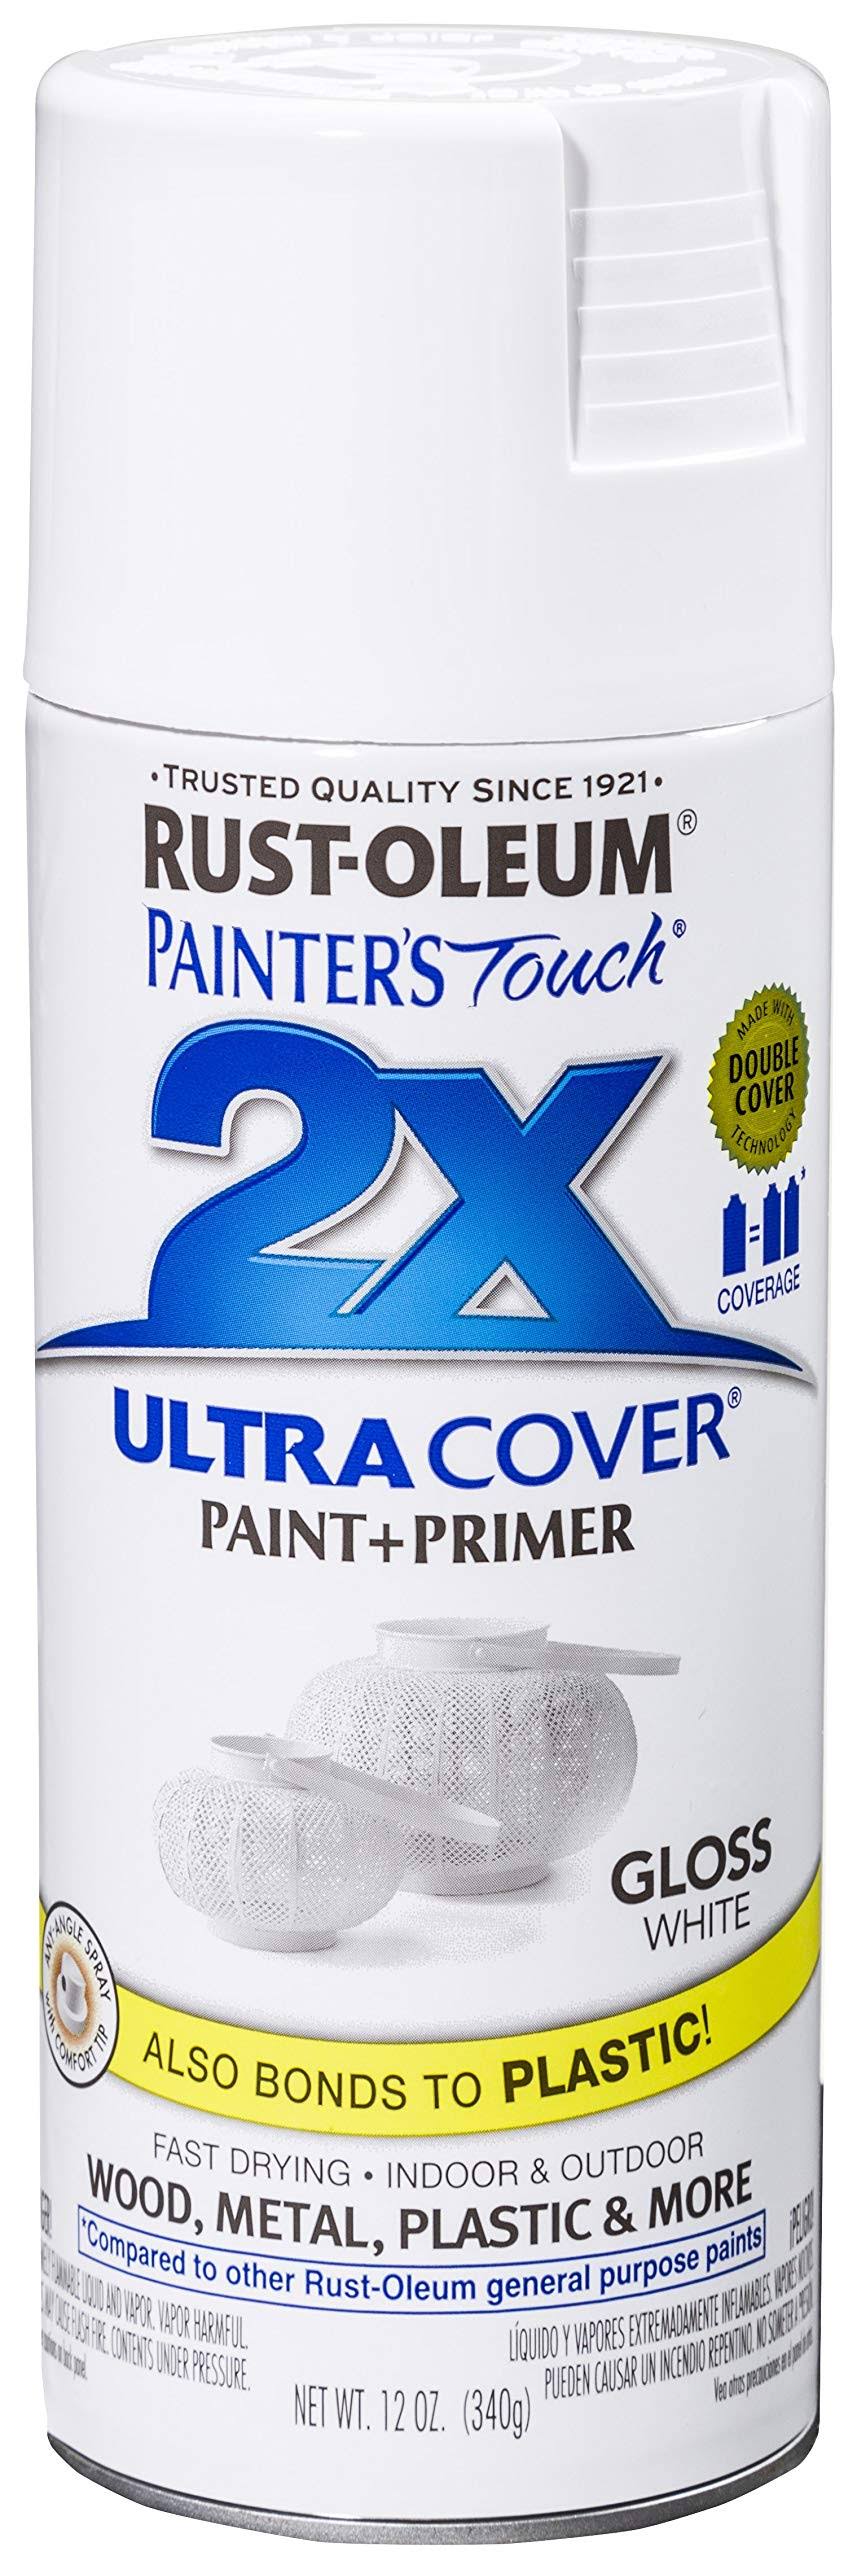 Rust-Oleum 249090 Painter's Touch 2X Ultra Cover - White